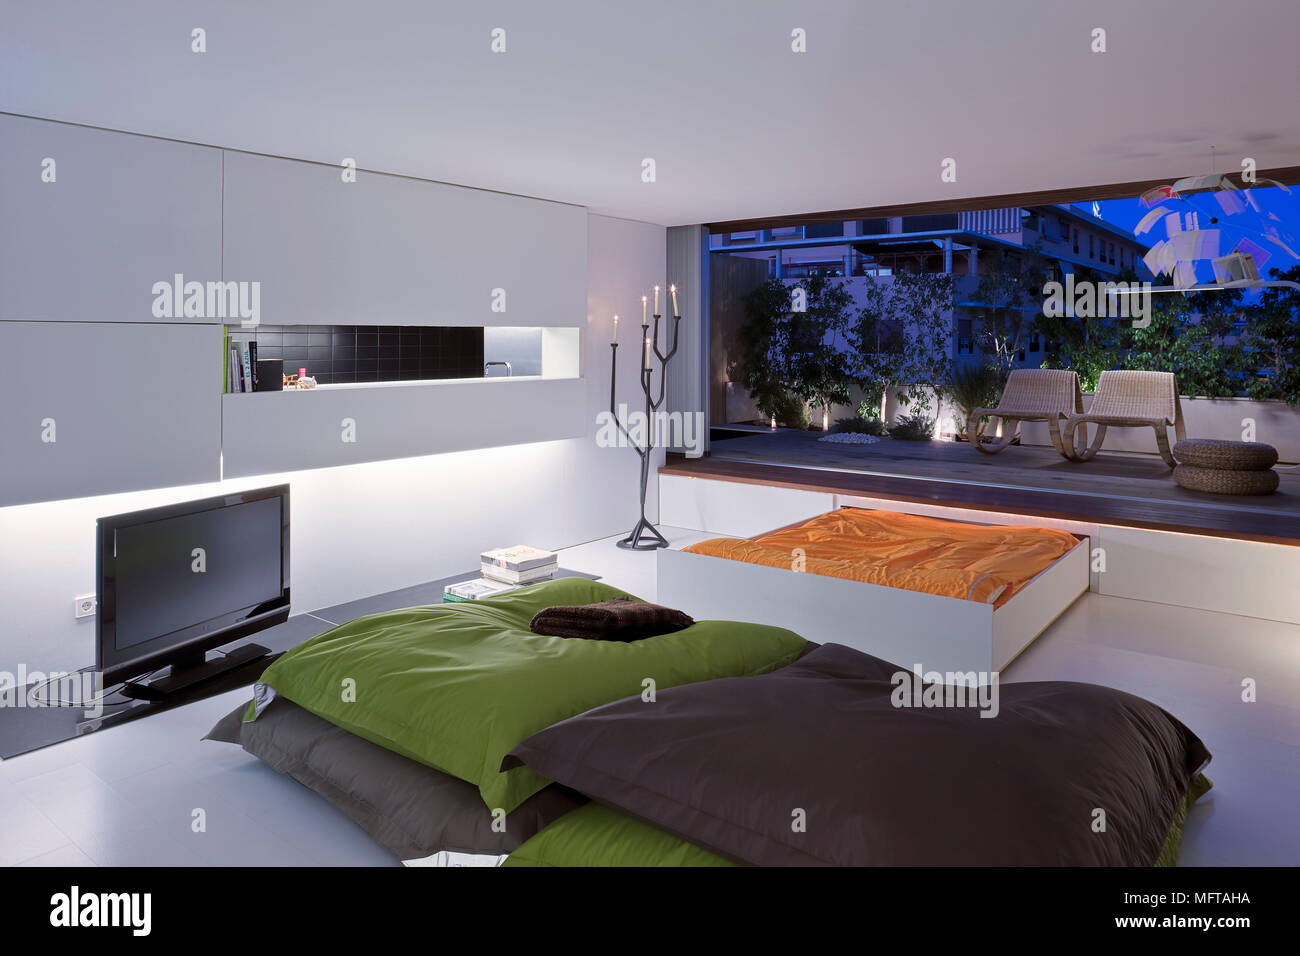 Floor Cushions In Front Of Widescreen Television In Modern Room